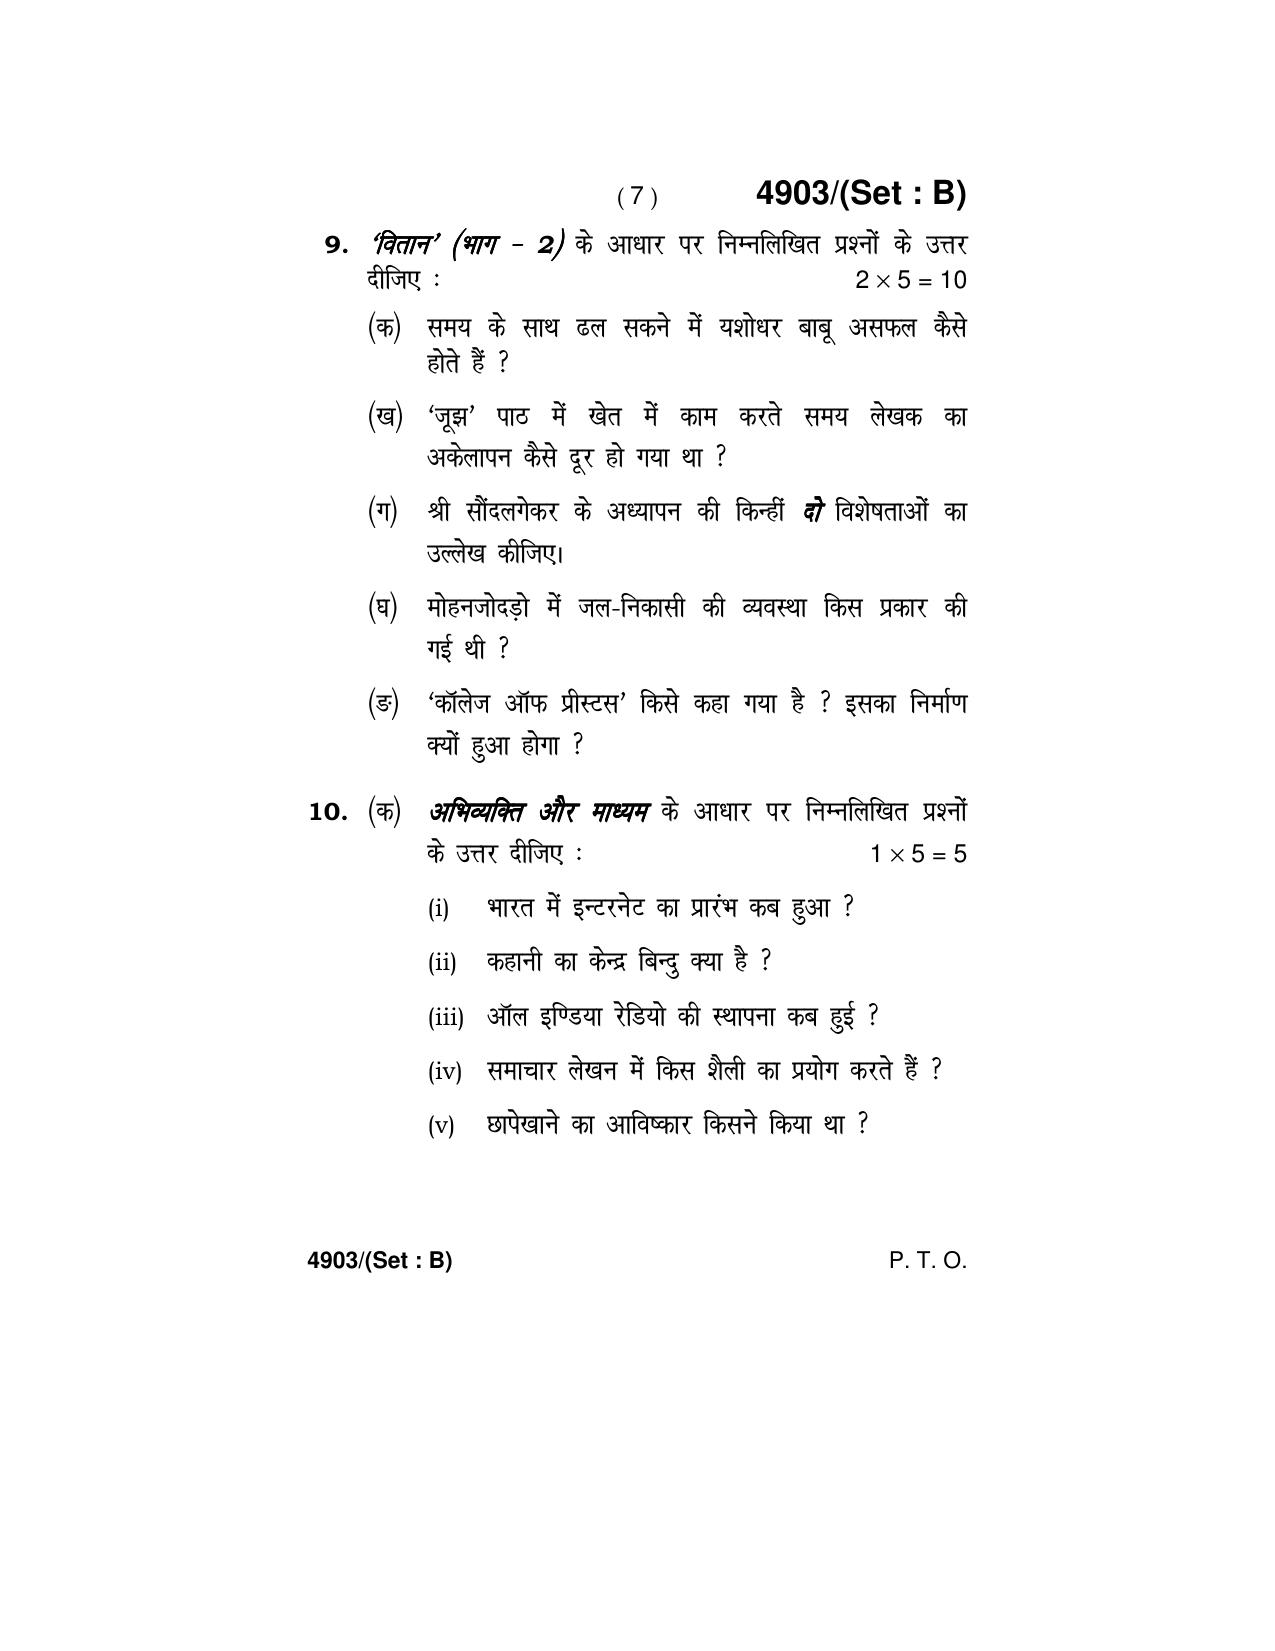 Haryana Board HBSE Class 12 Hindi Core 2020 Question Paper - Page 15